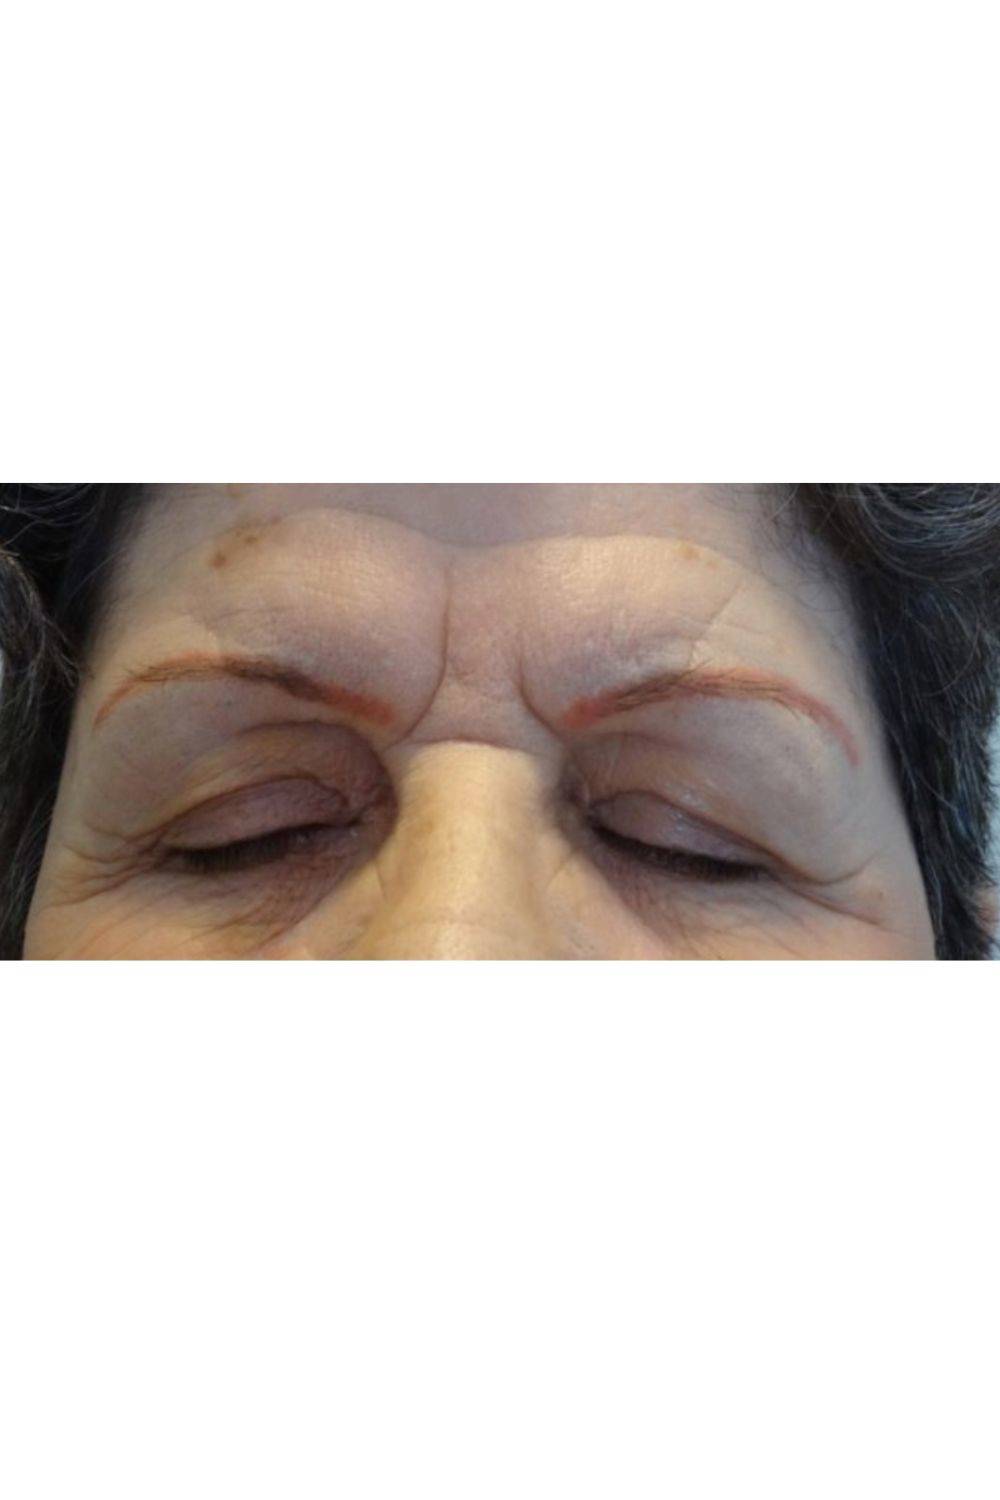 microblading mal hecho 8